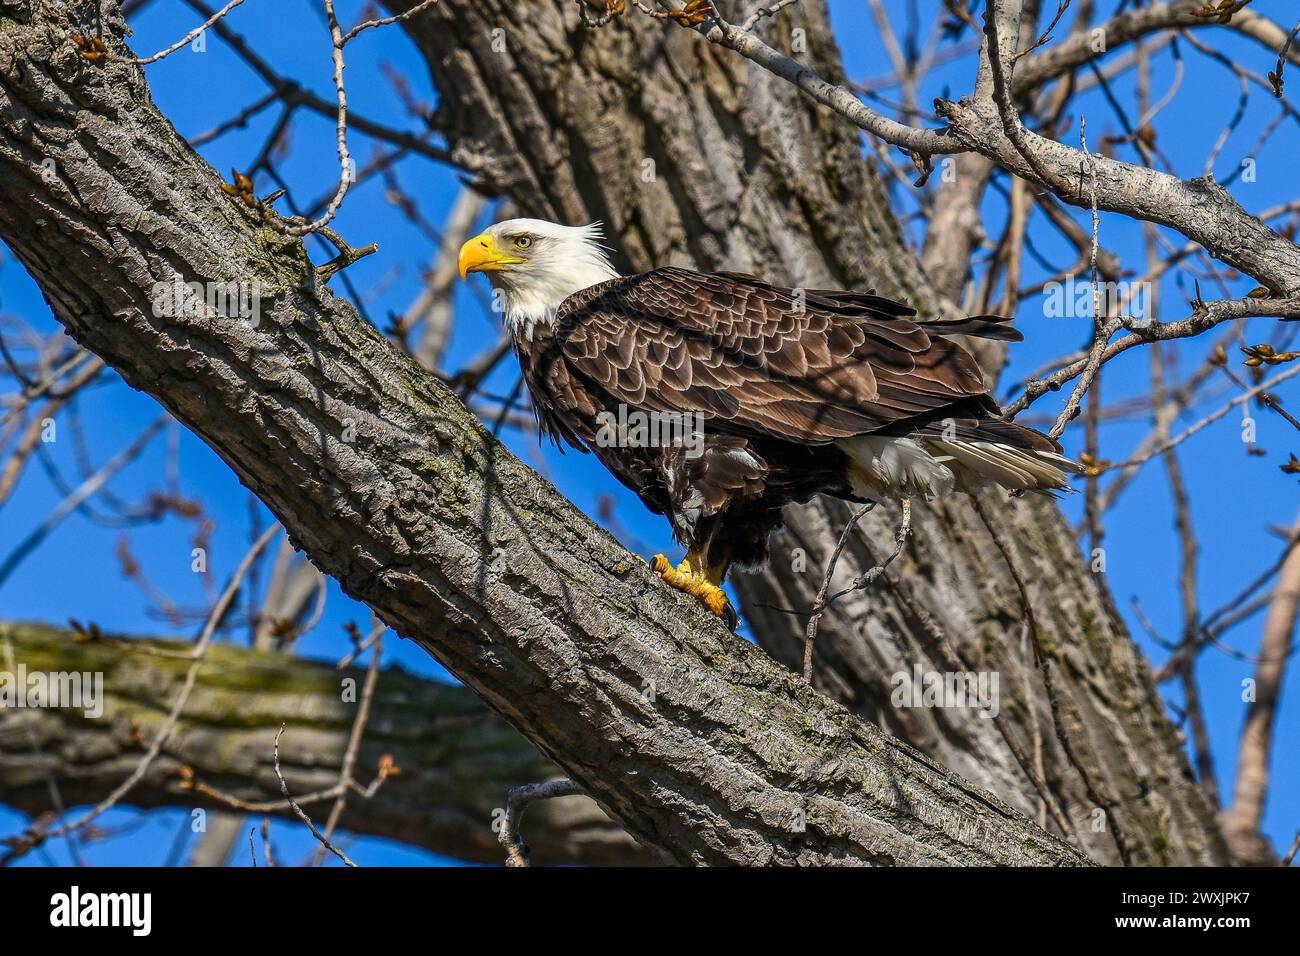 A solitary Bald eagle perched on a branch Stock Photo